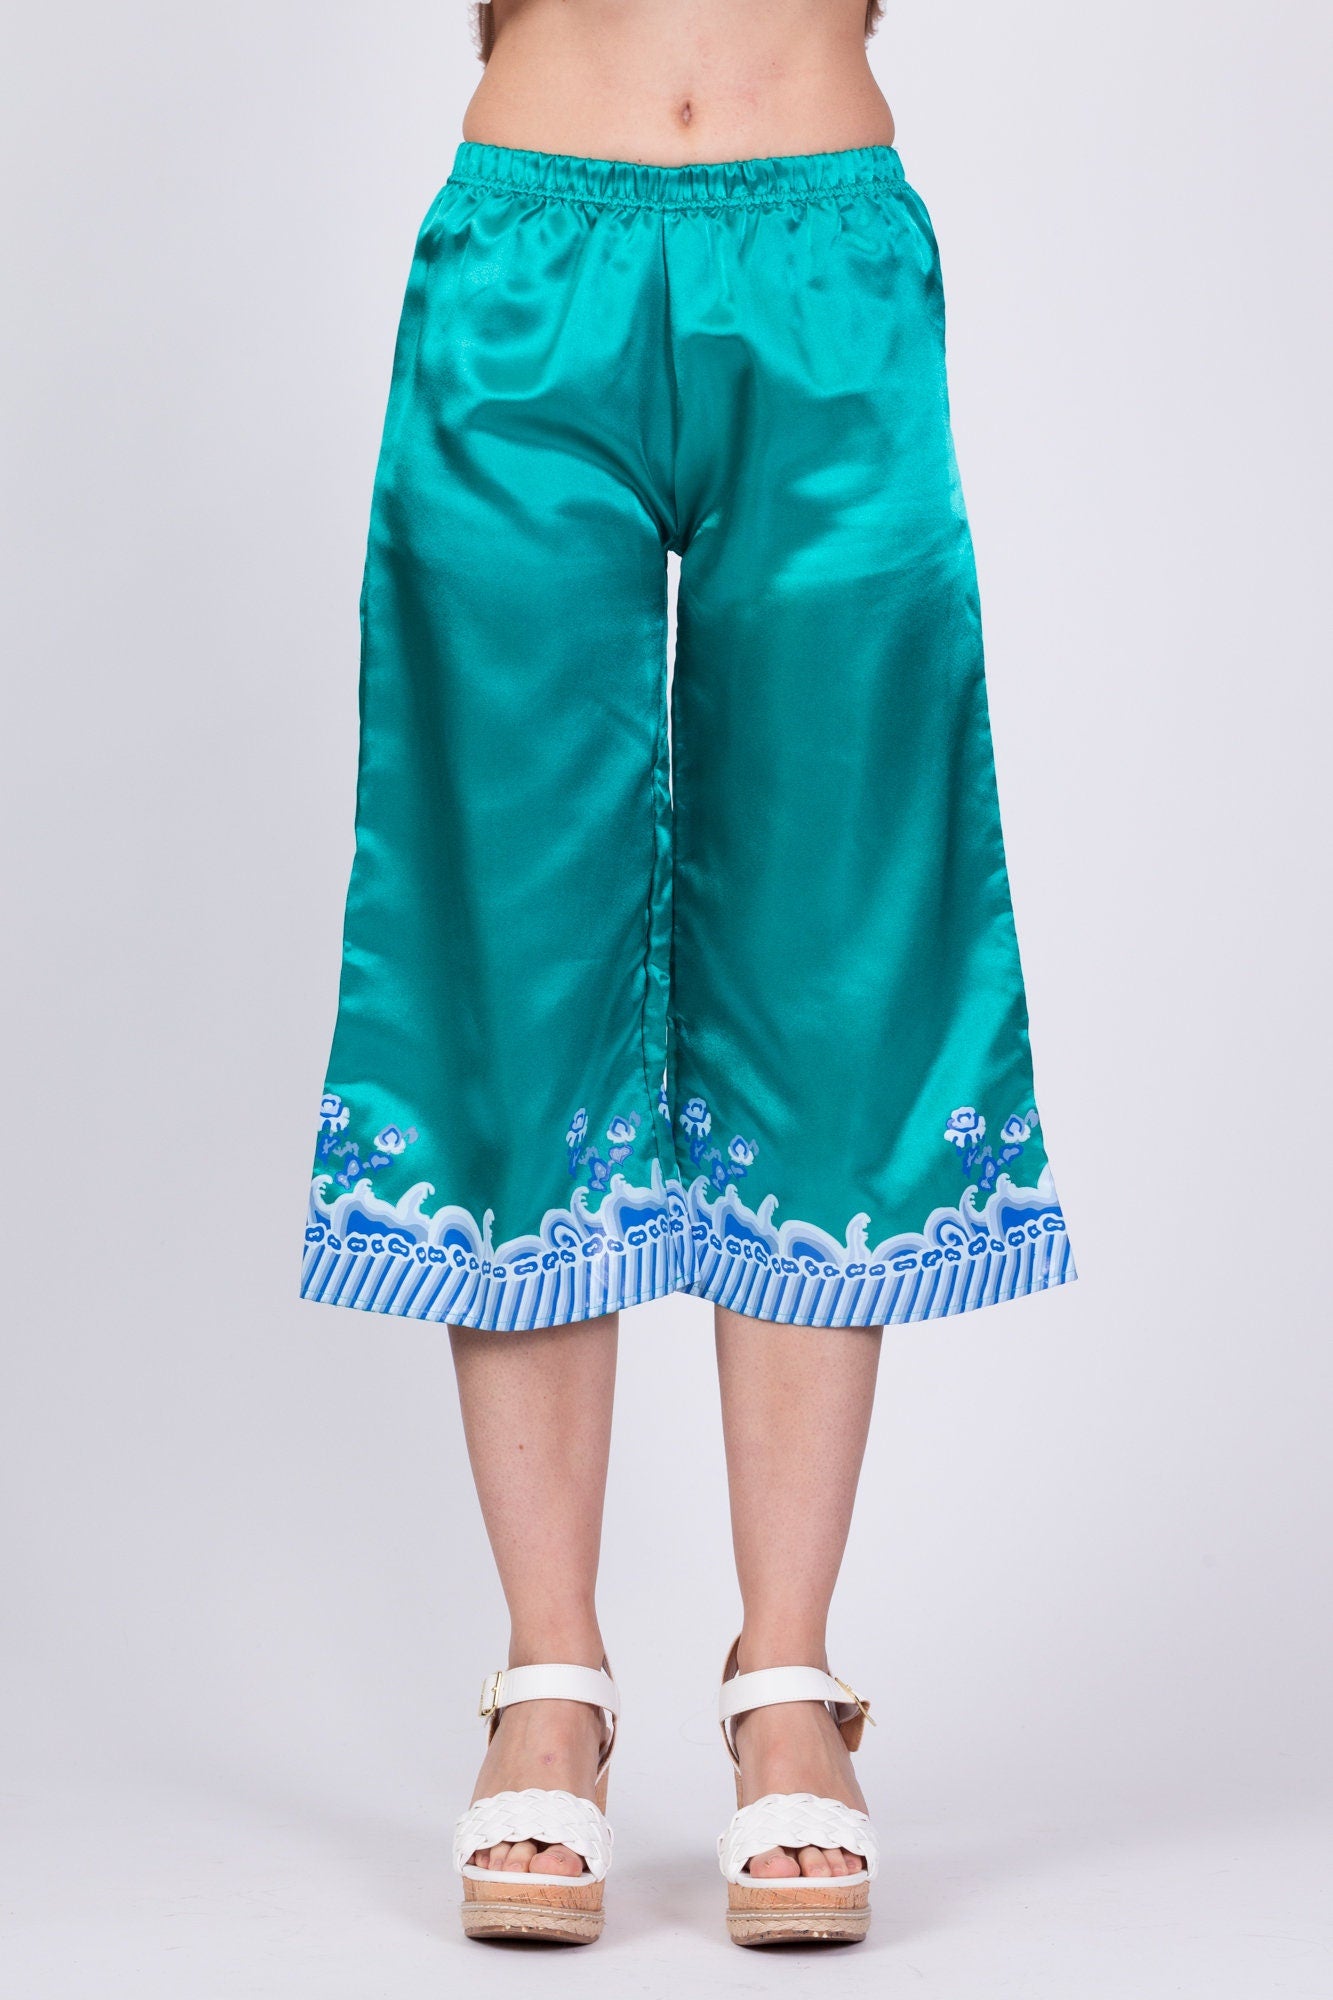 Vintage Teal Satin Wave Print Lounge Pants - Youth Small 